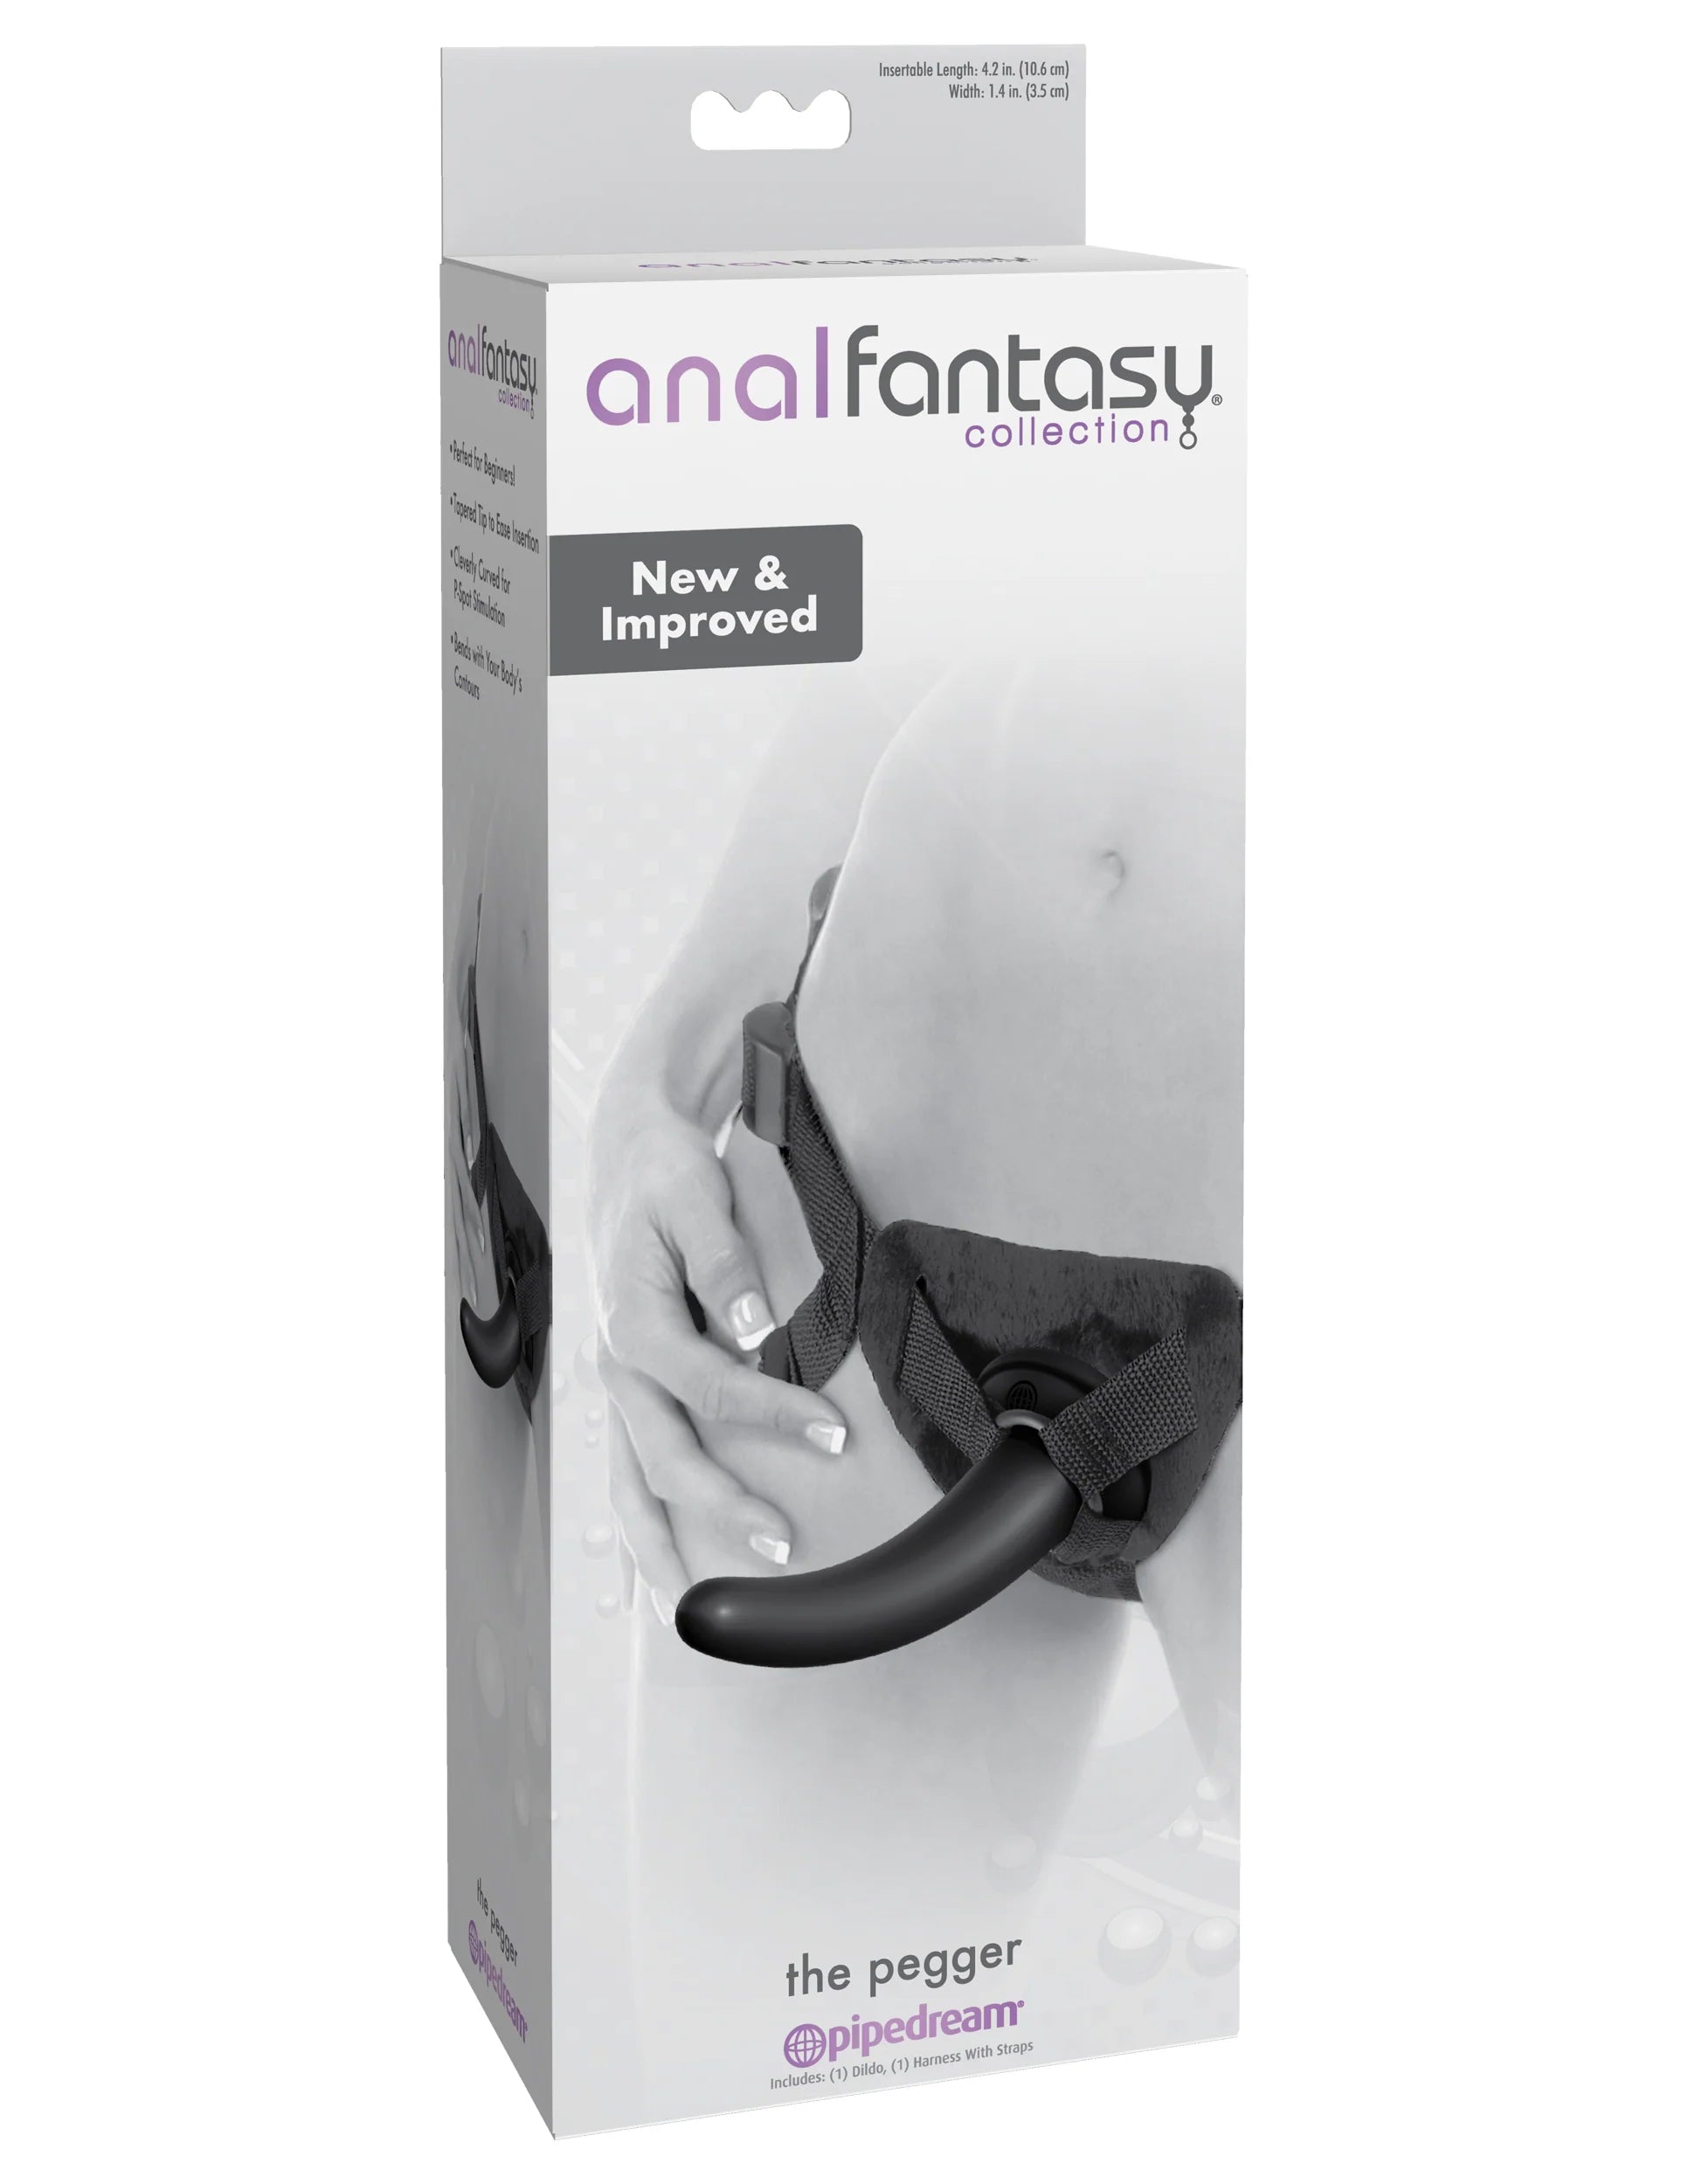 Pipedream Anal Fantasy Collection The Pegger 5 in. Dildo & Adjustable Strap-On Harness Set